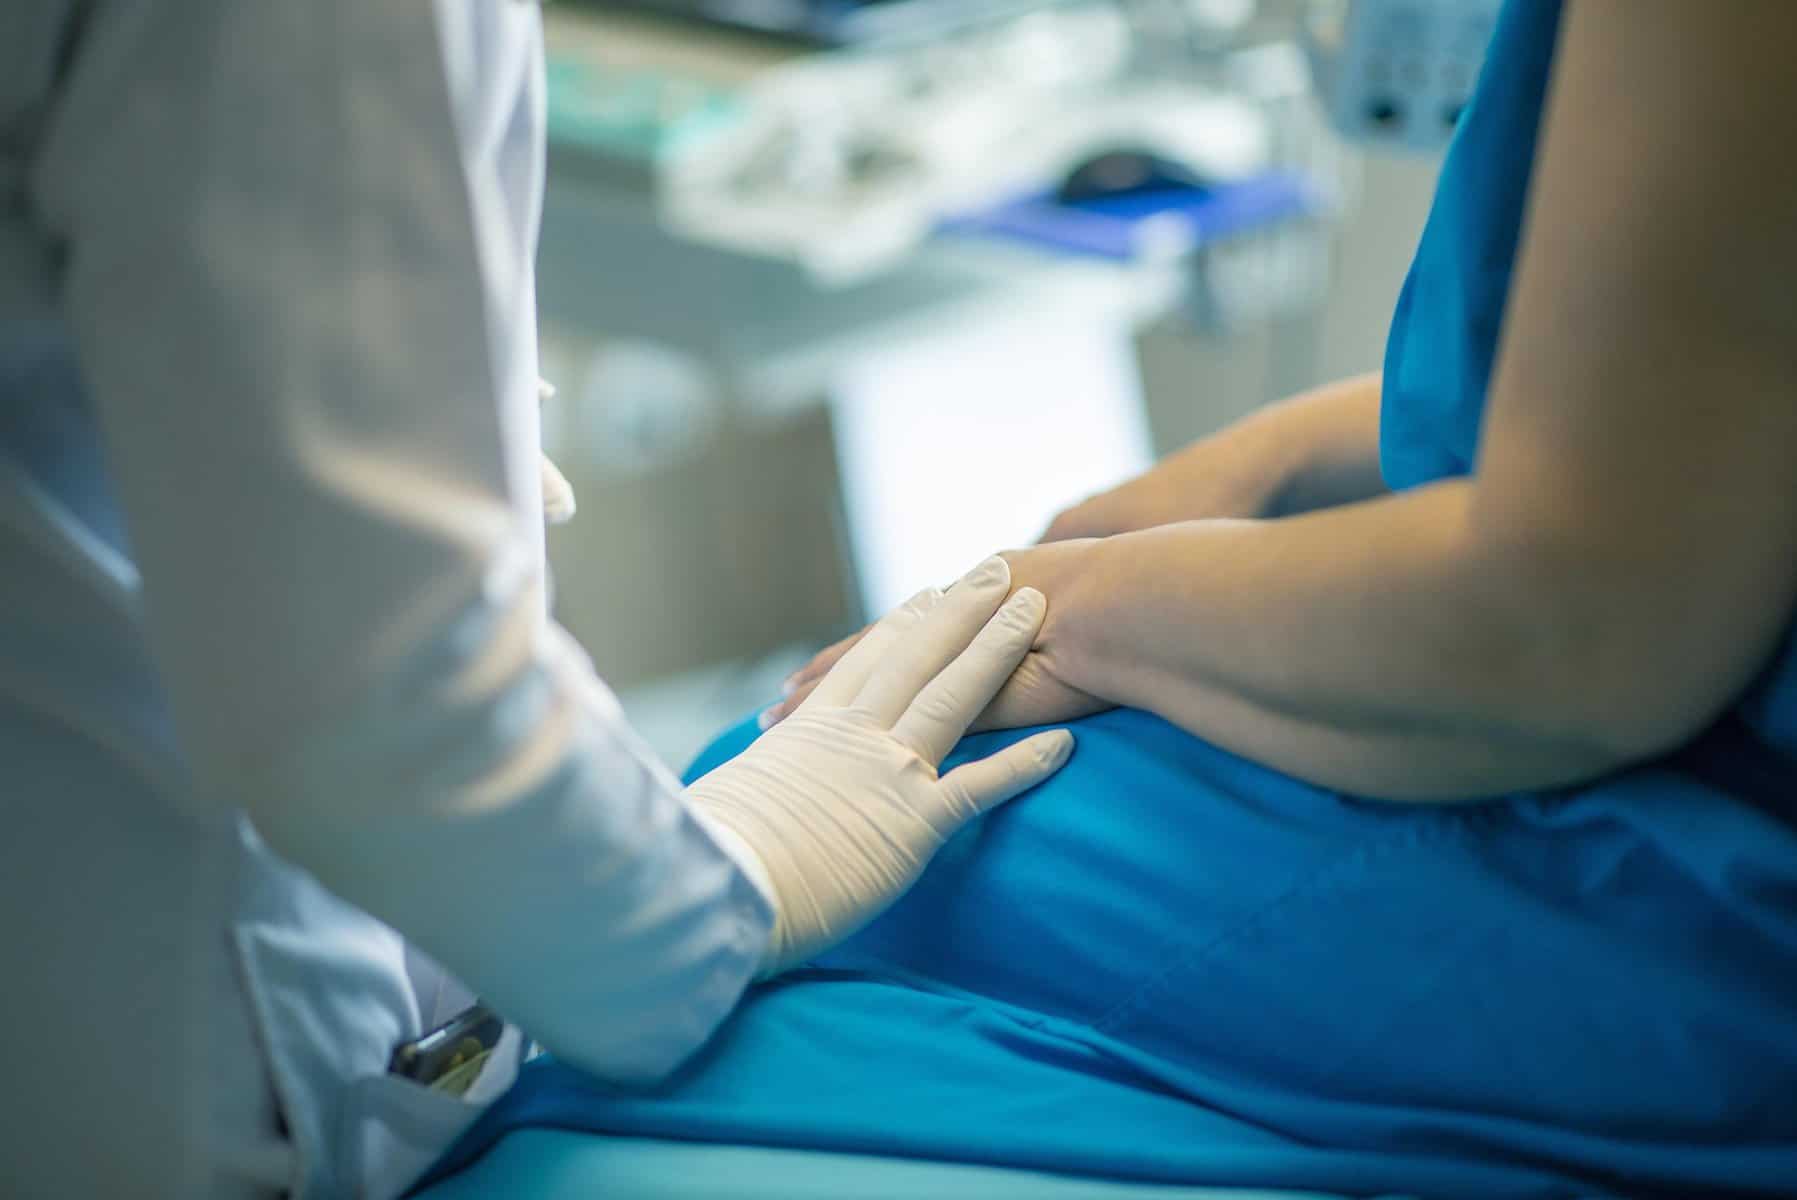 A woman sits on an exam table in a blue gown as the healthcare provider rests a hand on her arm.